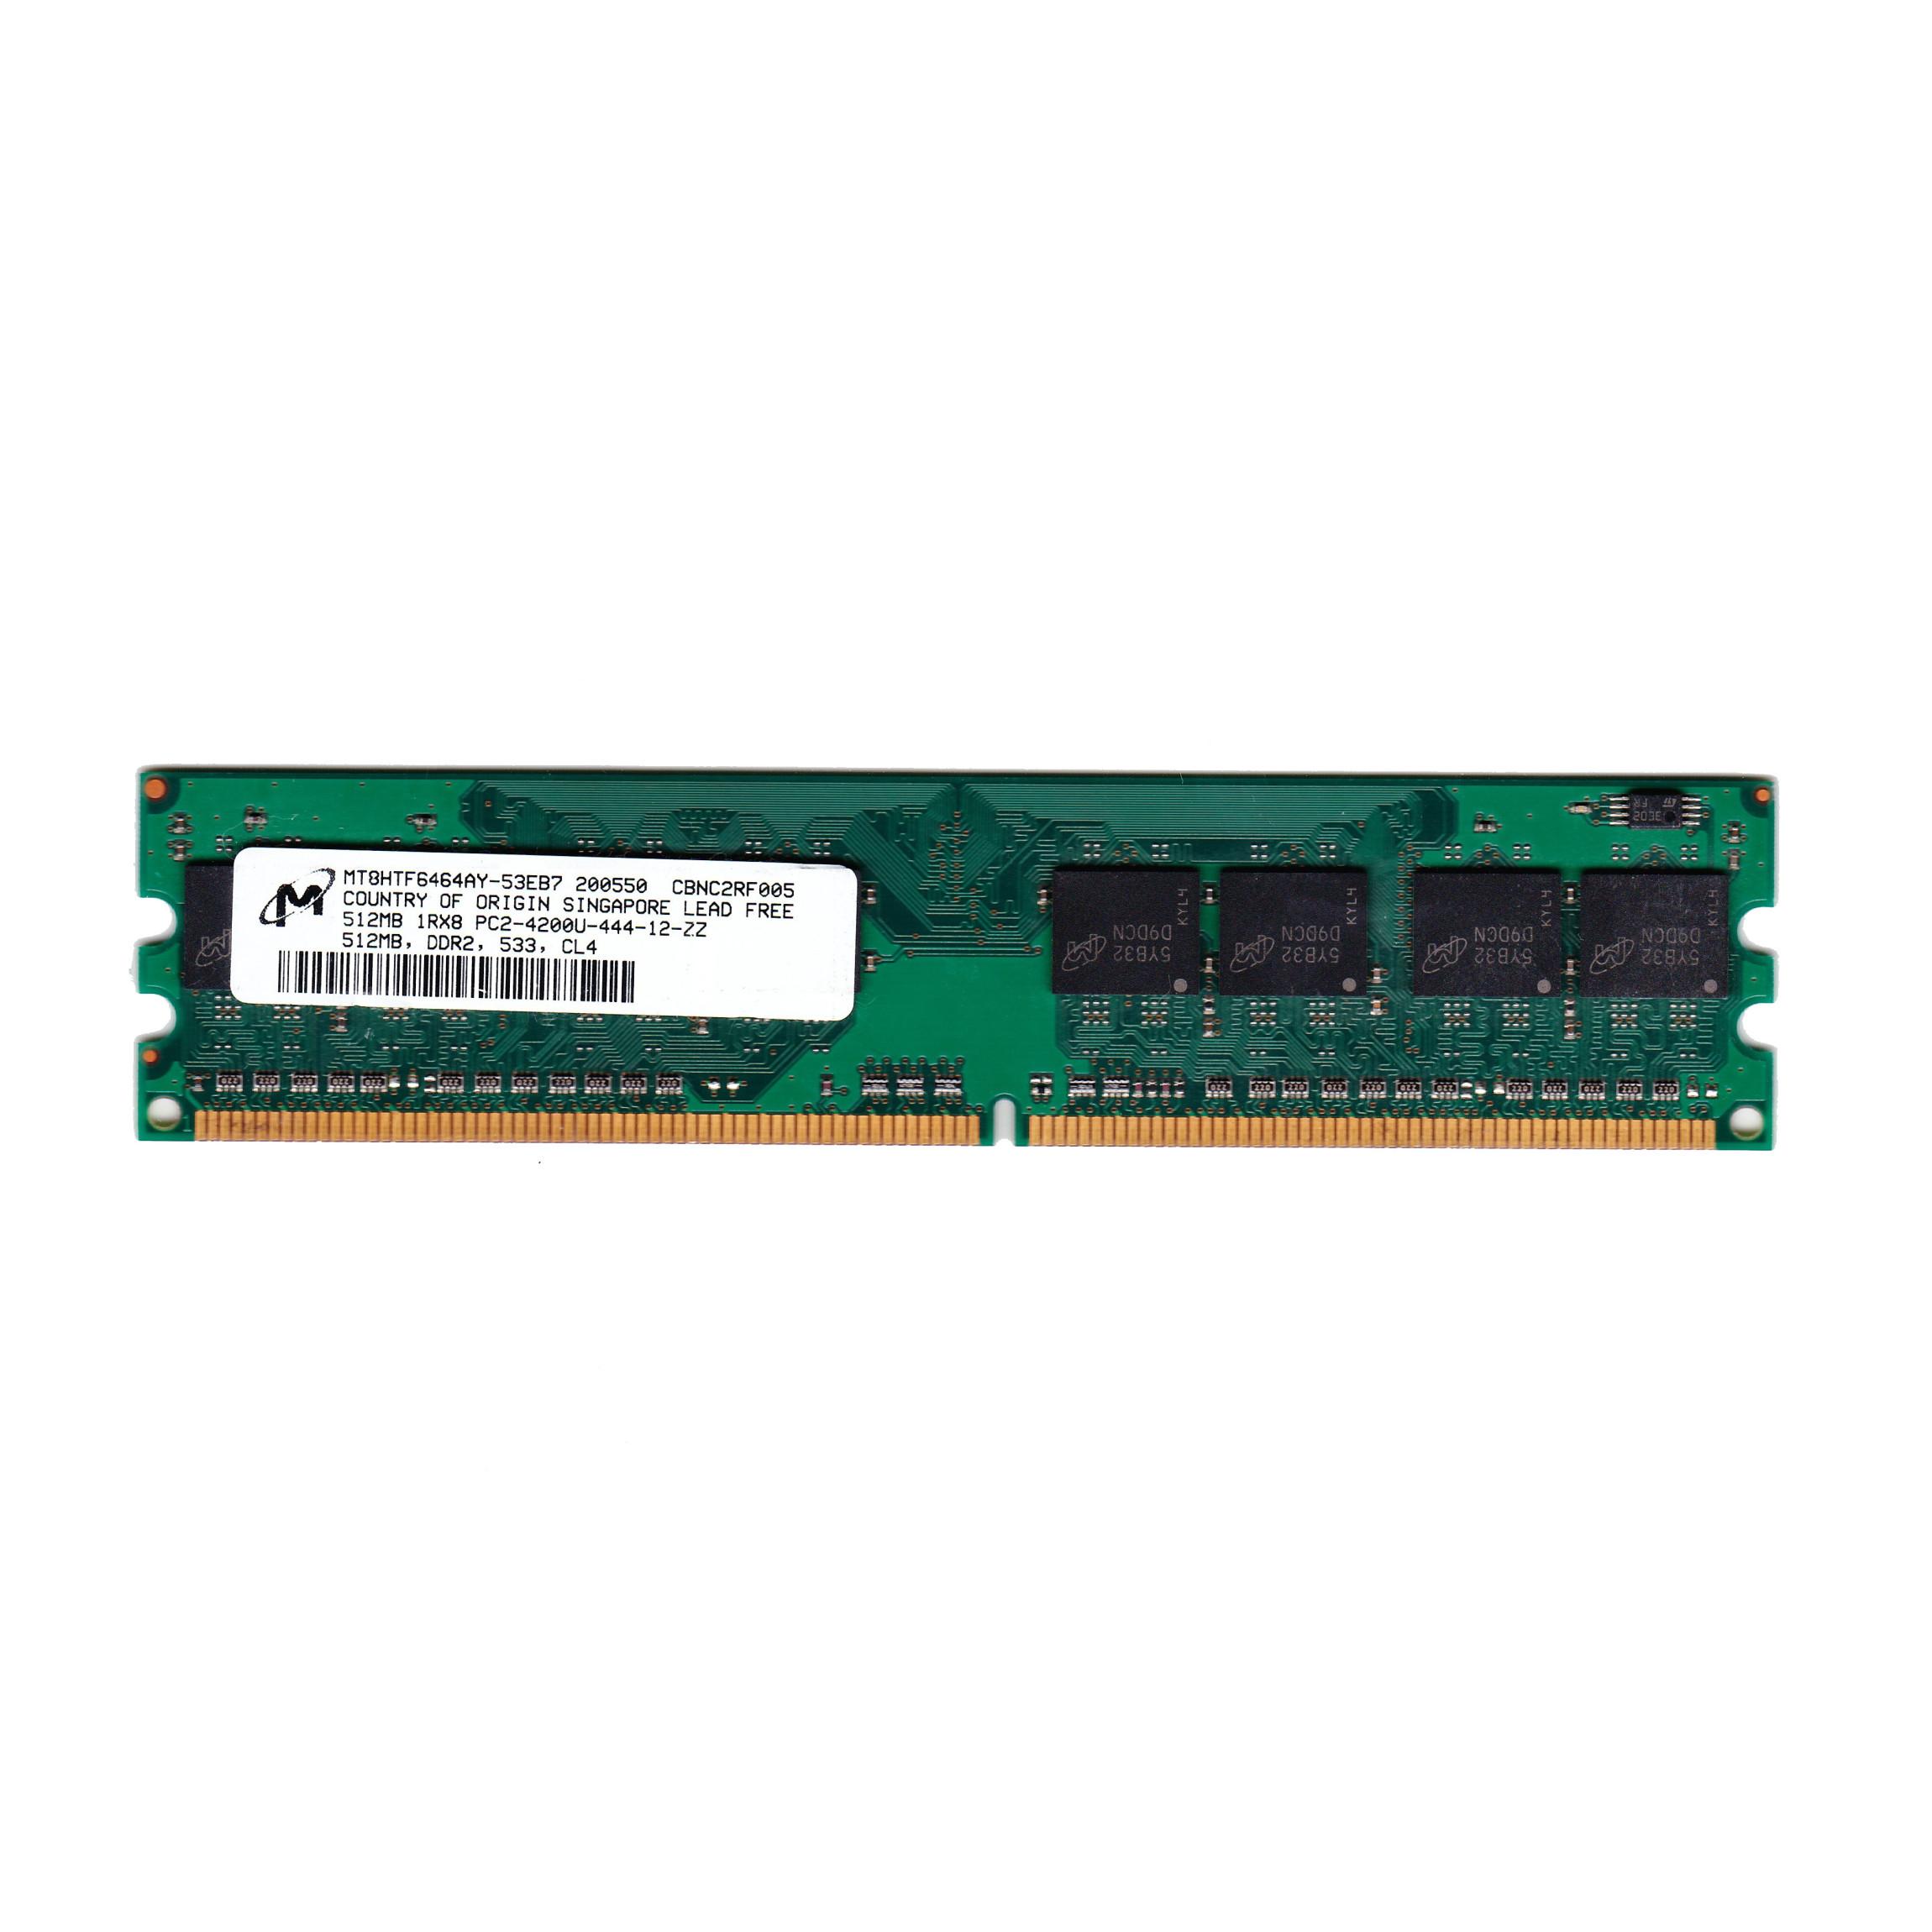 Preowned CRUCIAL 512MB DDR2 533 CL4 RAM (Untested)